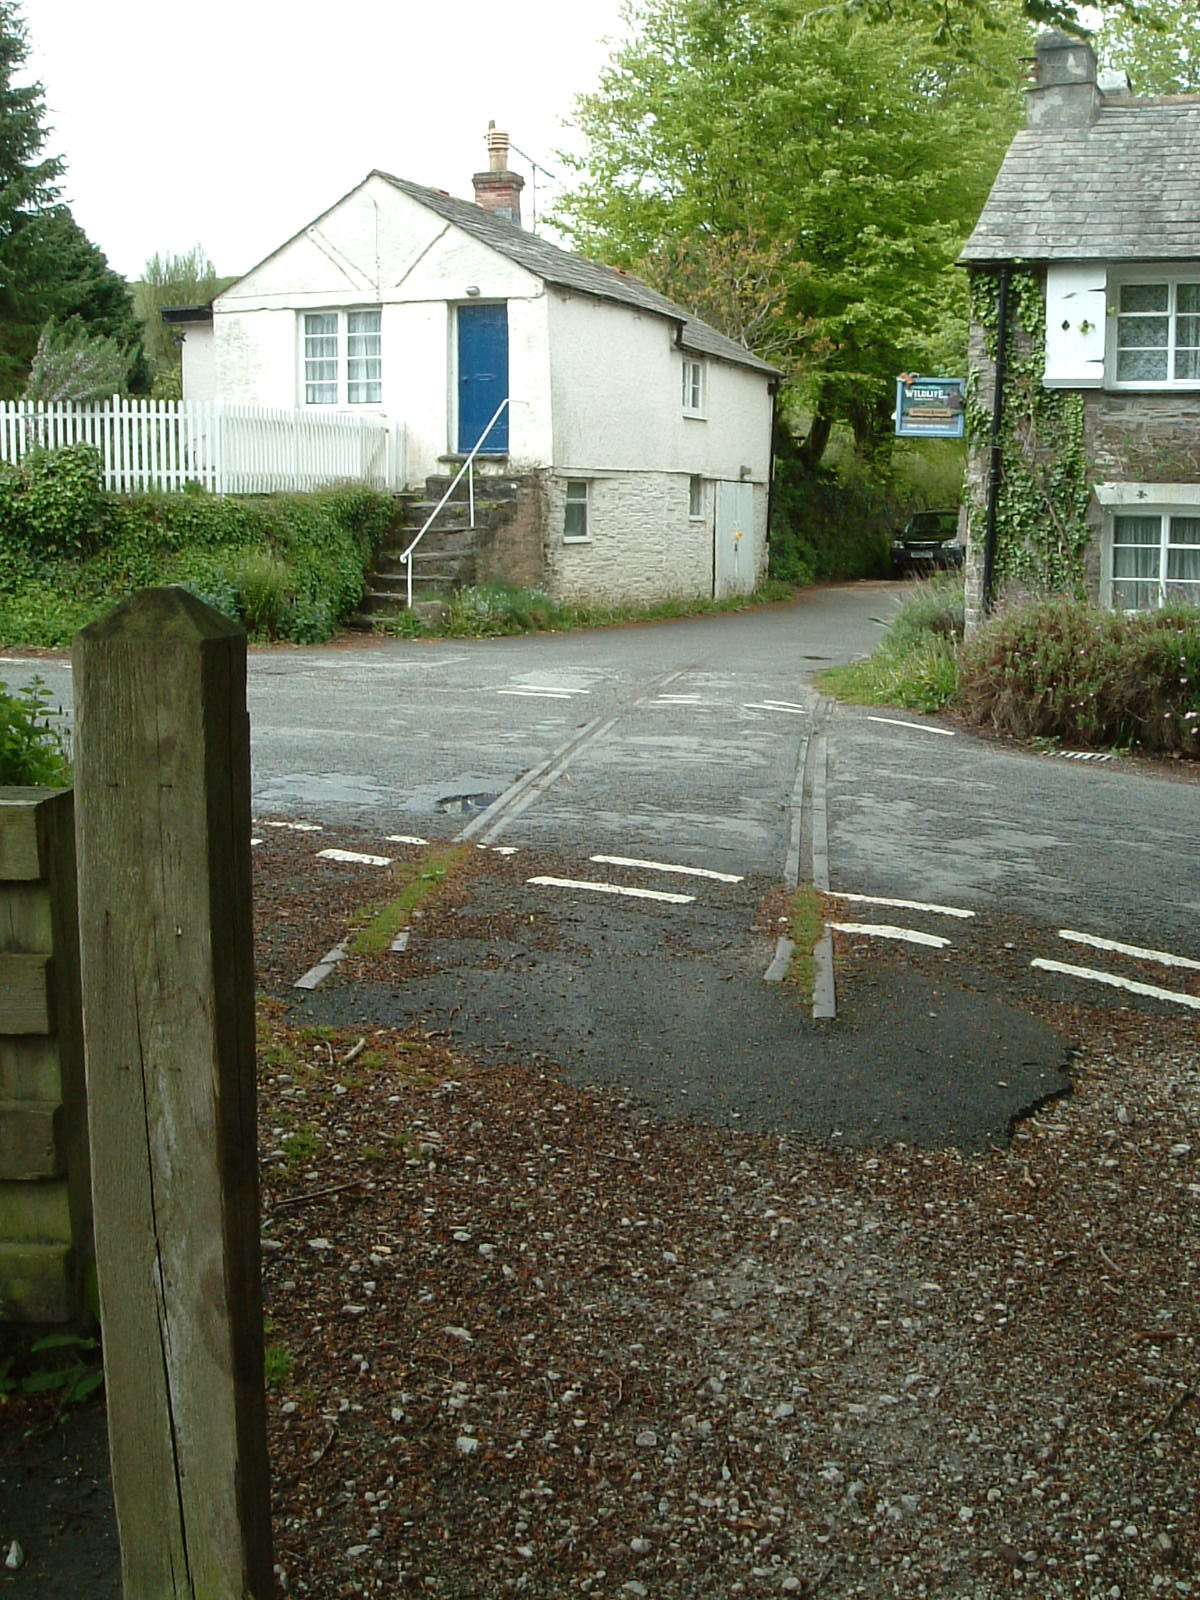 The remains of an old railway crossing on the Camel Trail